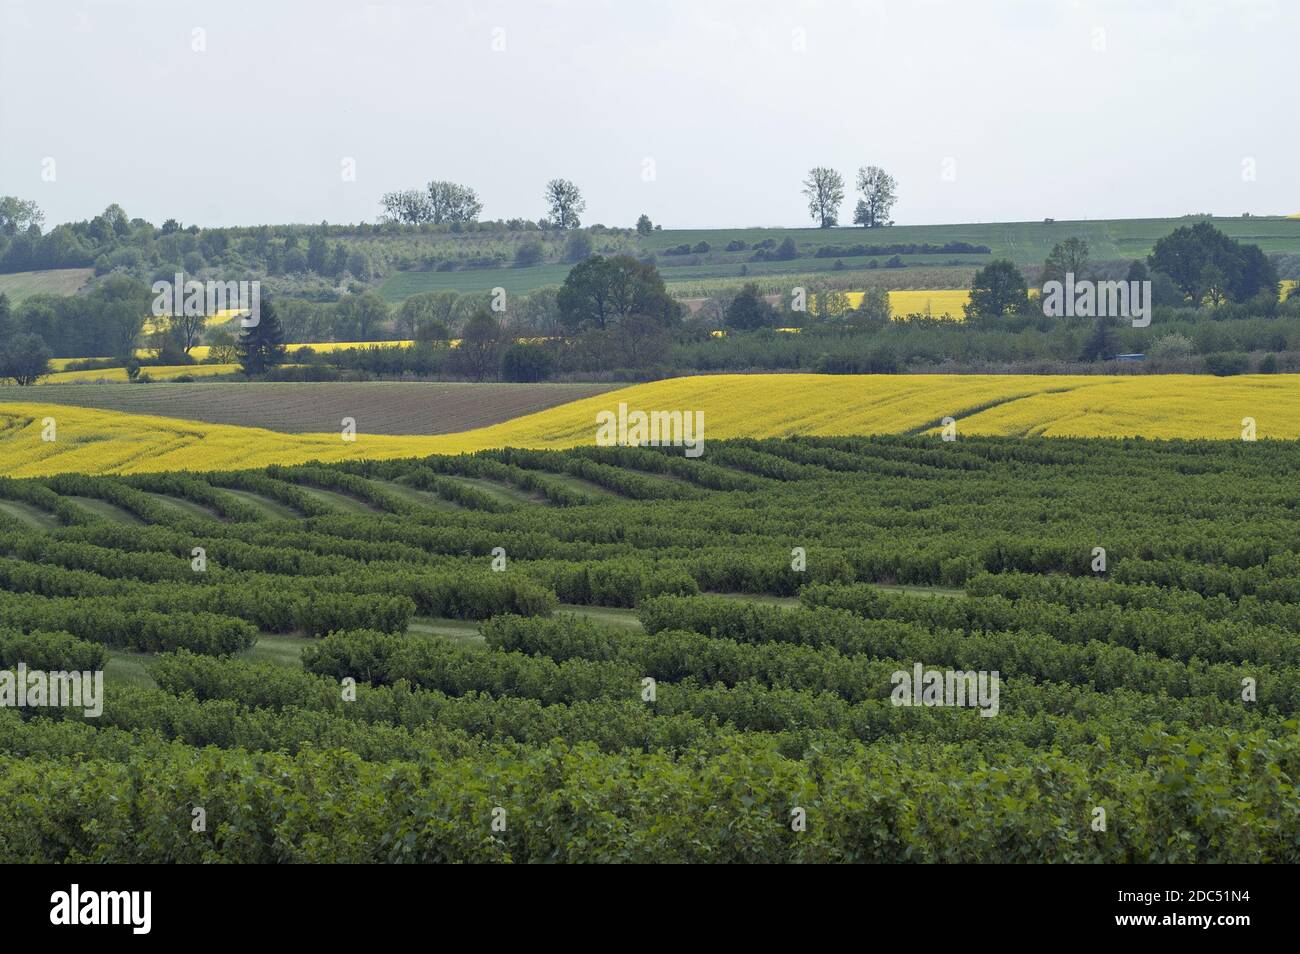 Polska, Poland, Polen, Lower Silesia, Niederschlesien; Blooming Rapeseed and lush green fields and trees - a typical Polish landscape in spring. Stock Photo